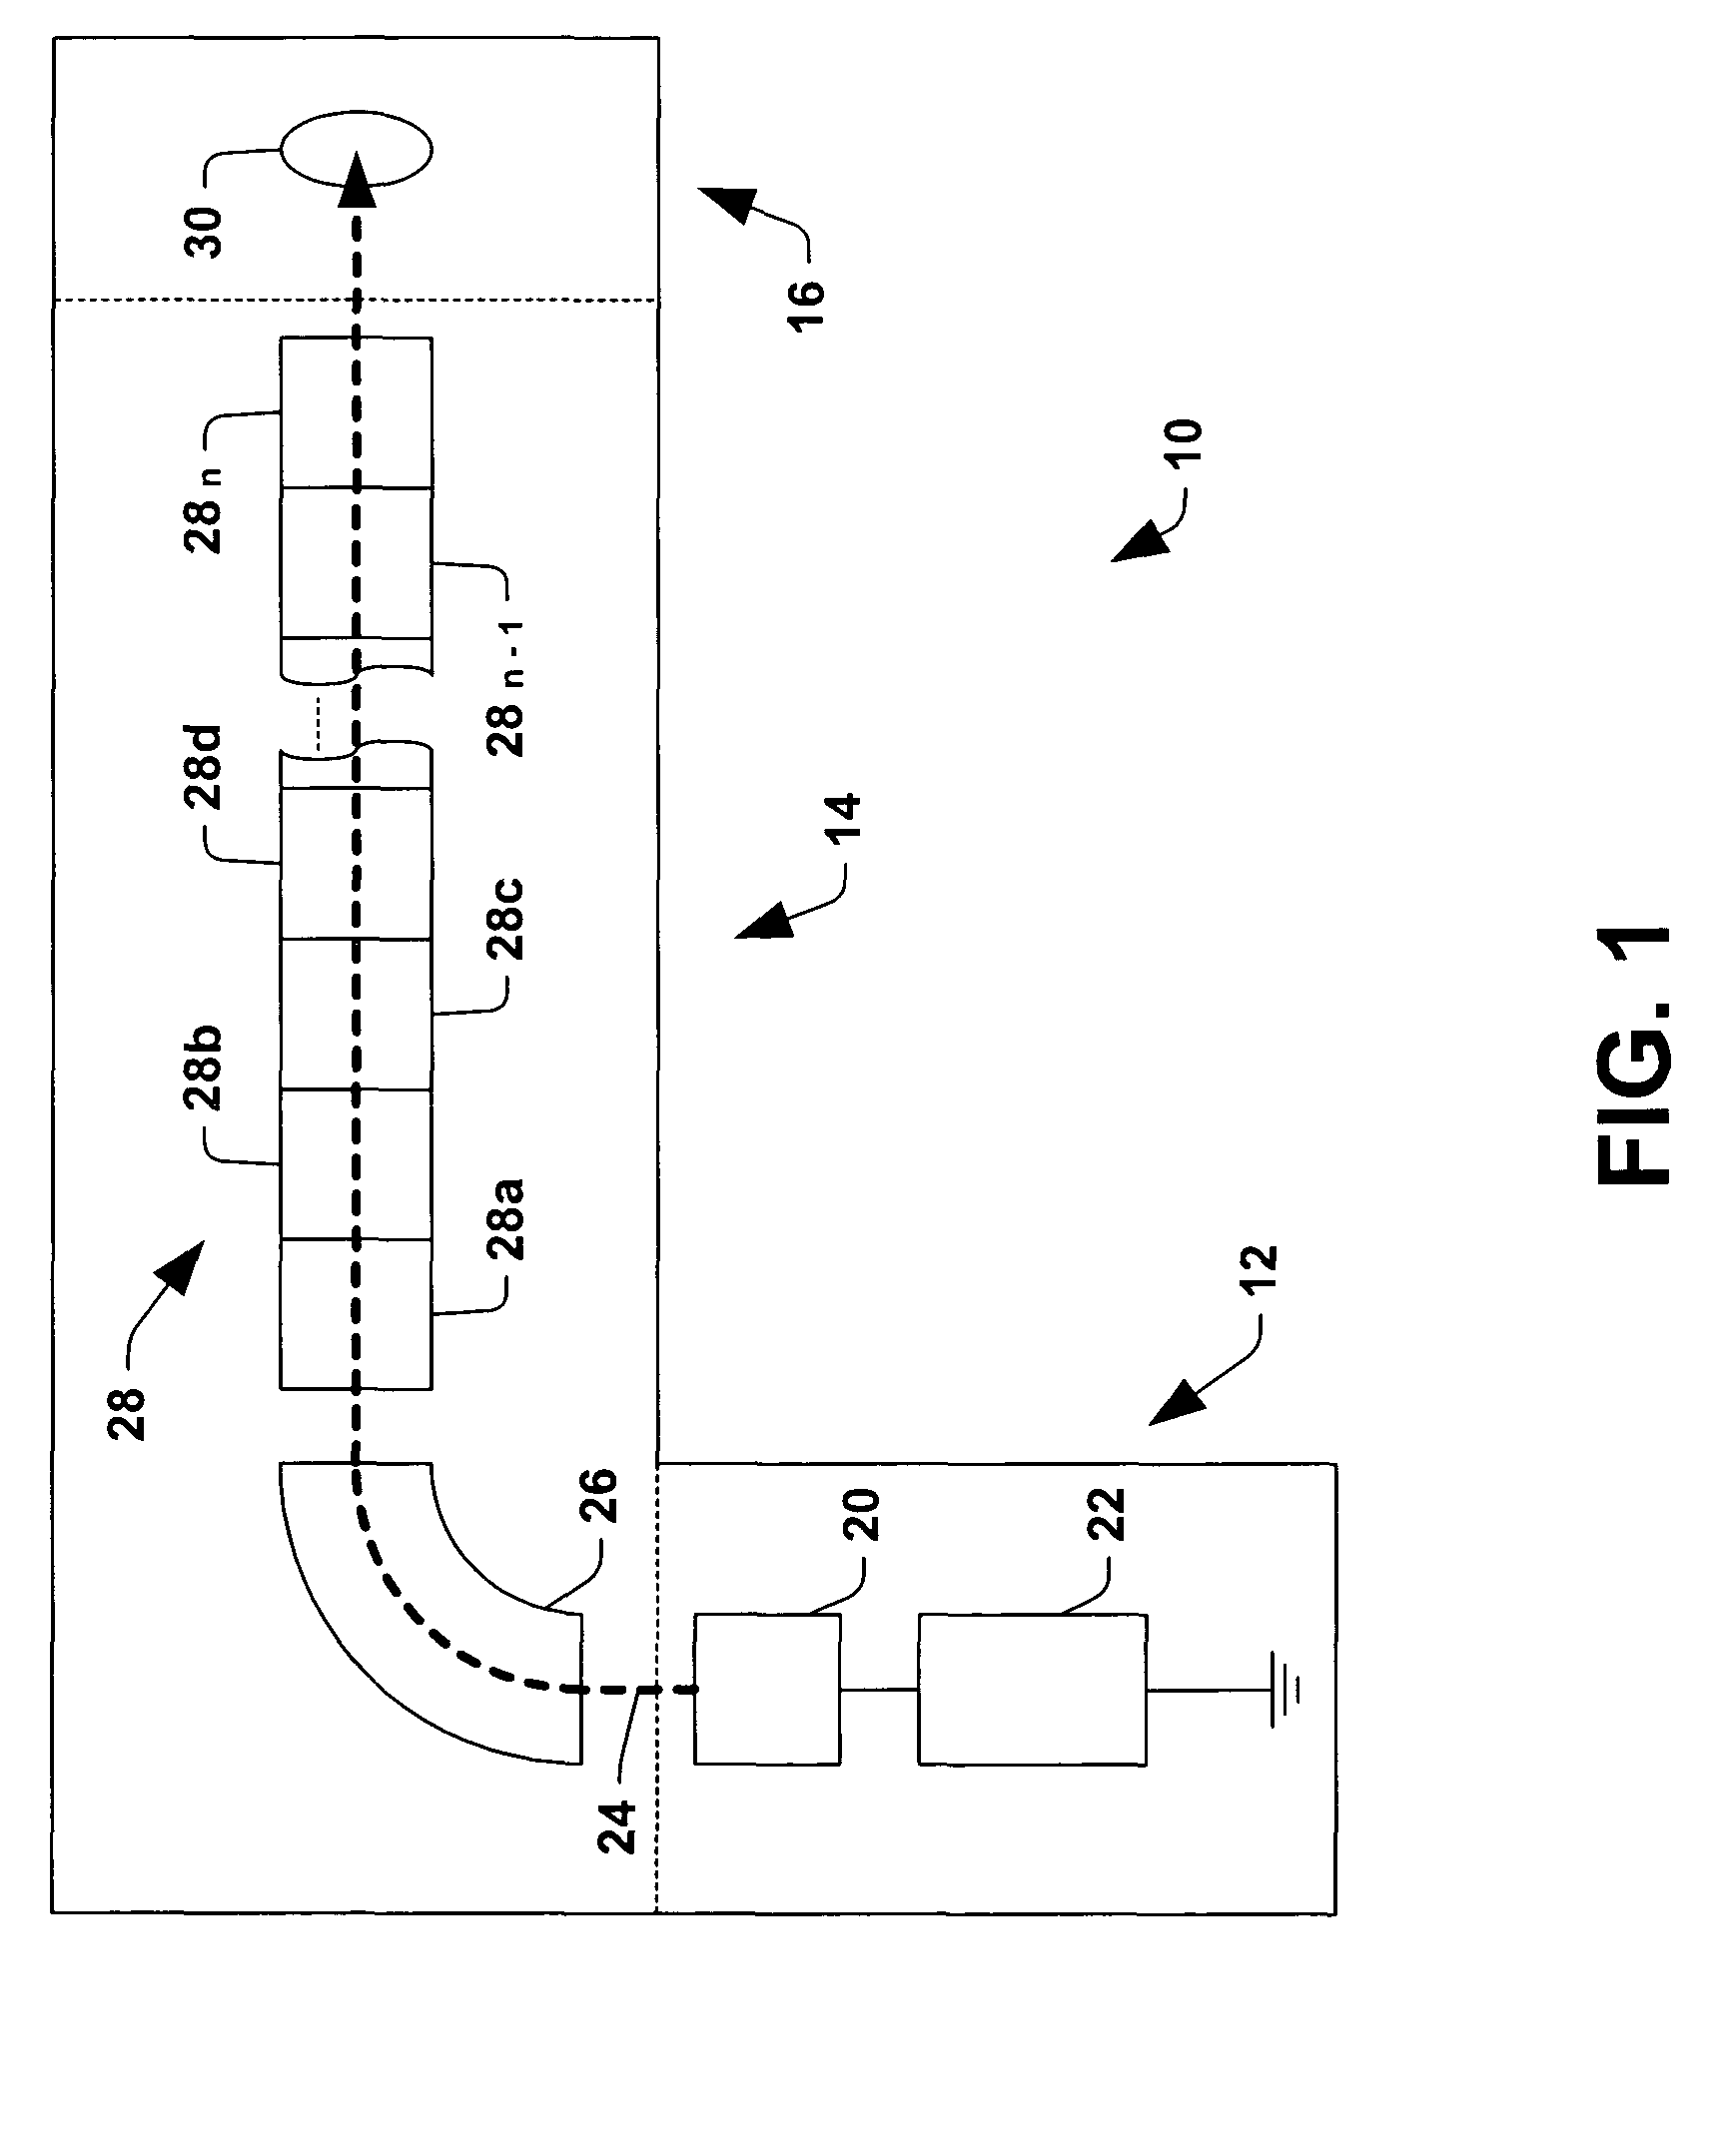 Unipolar electrostatic quadrupole lens and switching methods for charged beam transport